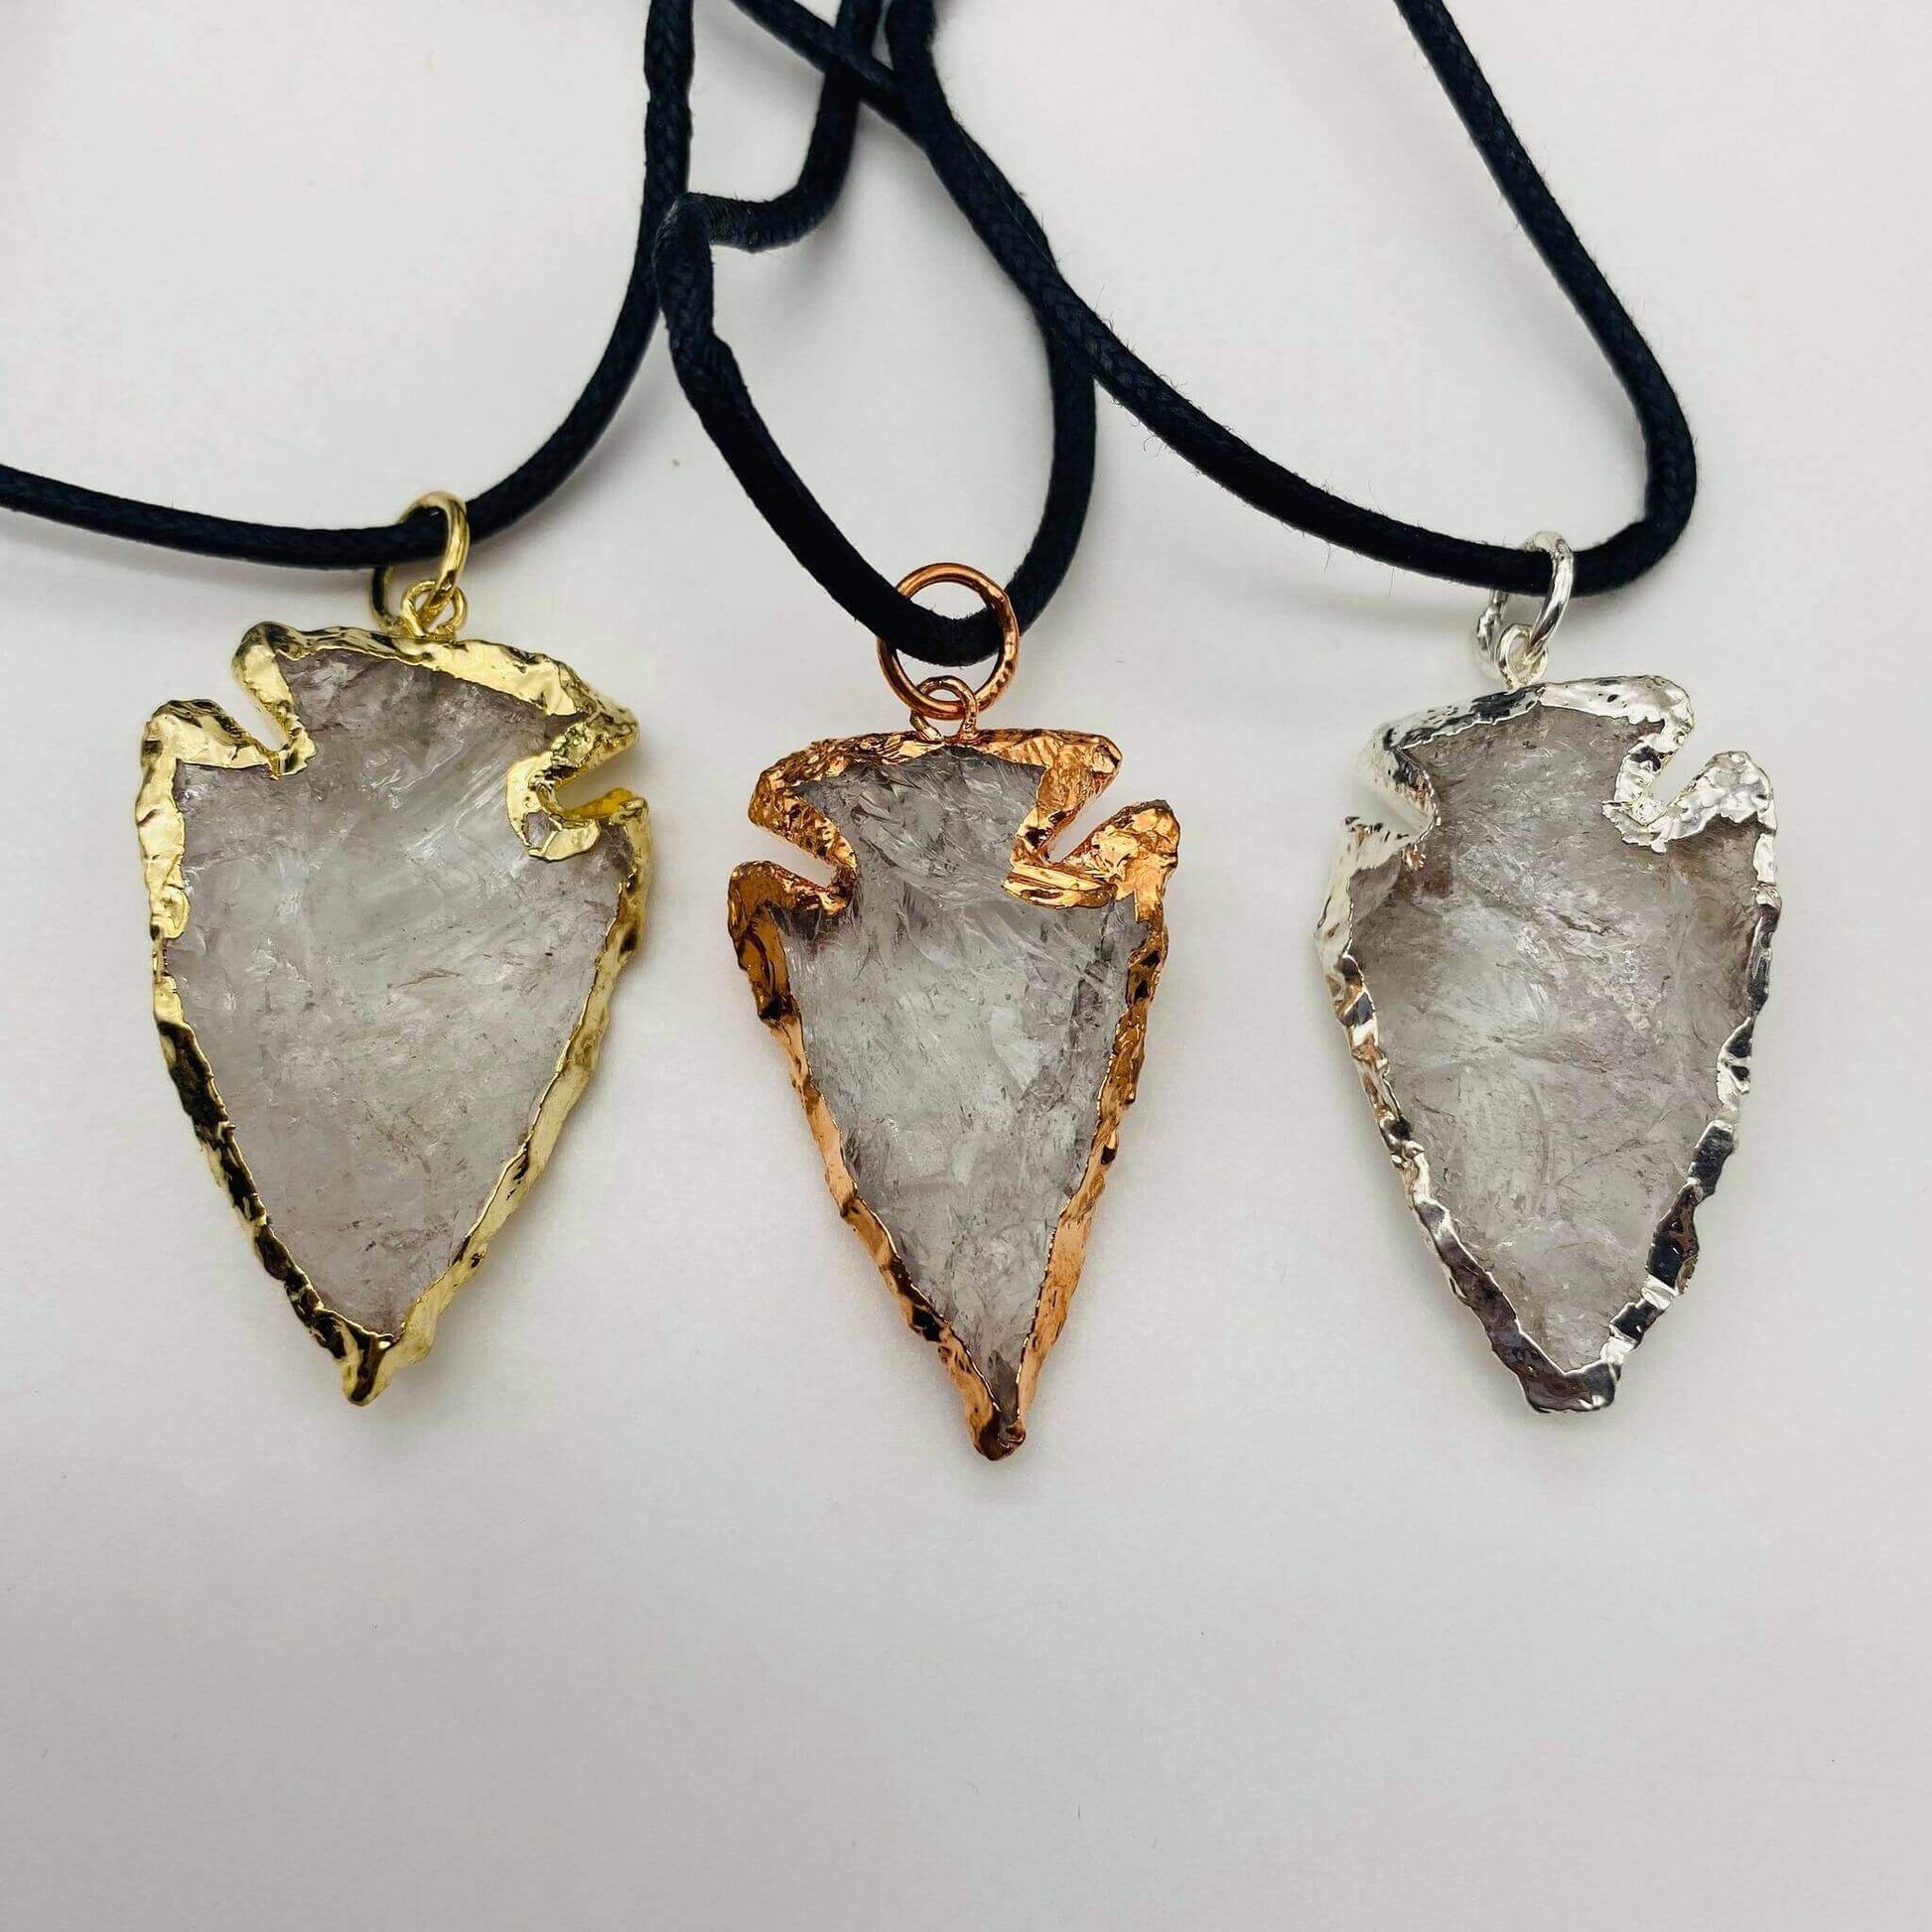 Clear Quartz Arrowhead Necklace at $25 only from Spiral Rain